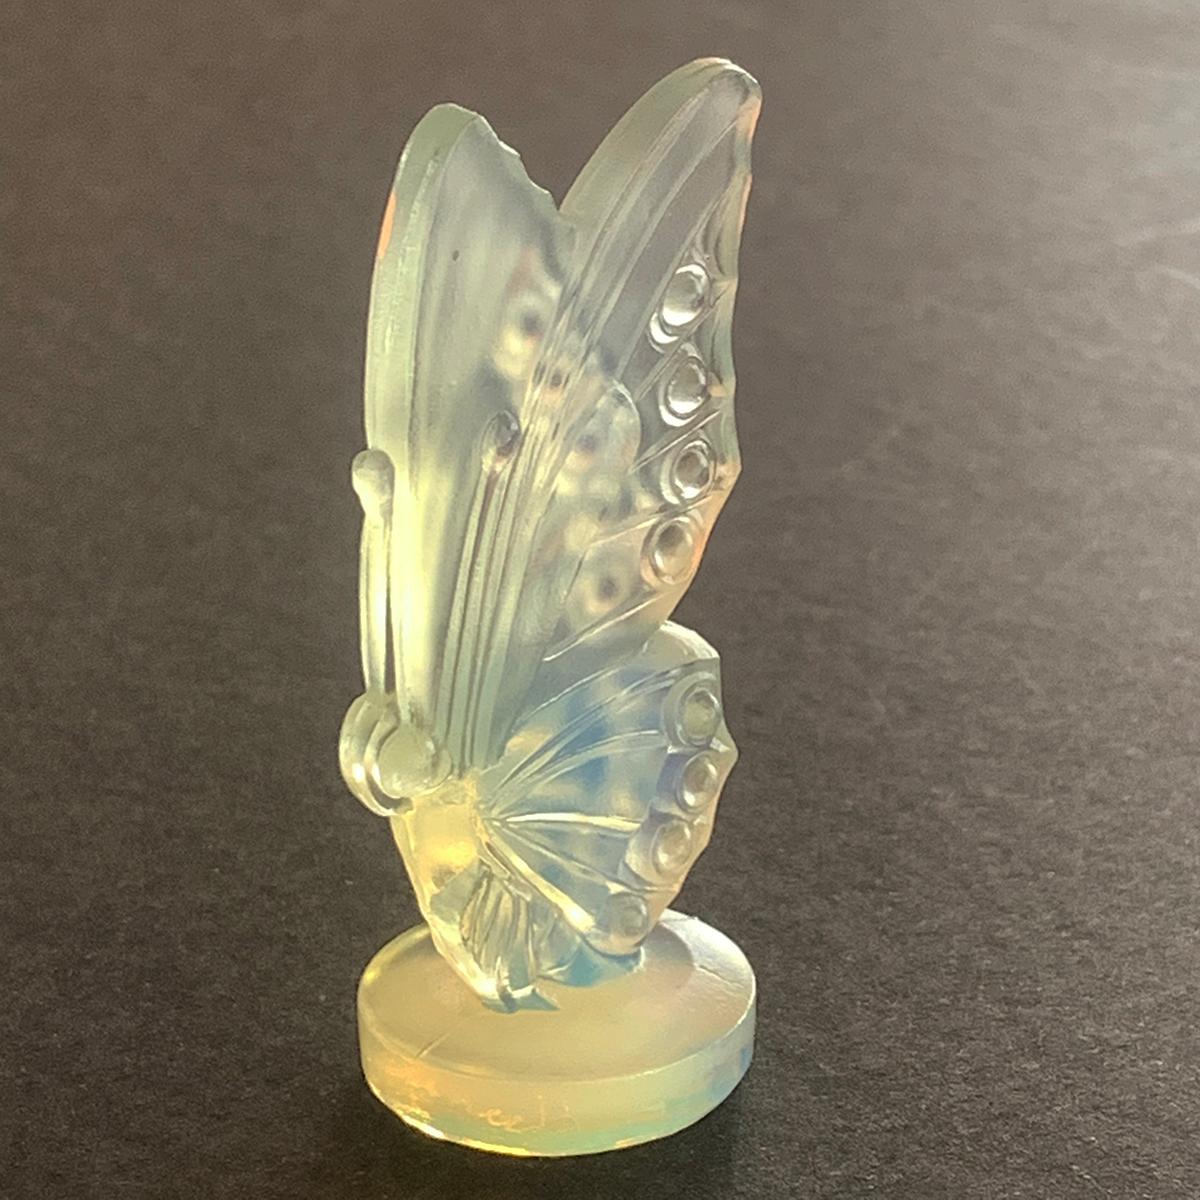 Art Deco Sabino opalescent butterfly wings closed. Concentrated opalescence and very fine detail. This lovely small example is a collectors dream as it is perfect and also has 3 Hallmarks. Along the lower, rear edge of the statuette “SABINO FRANCE”